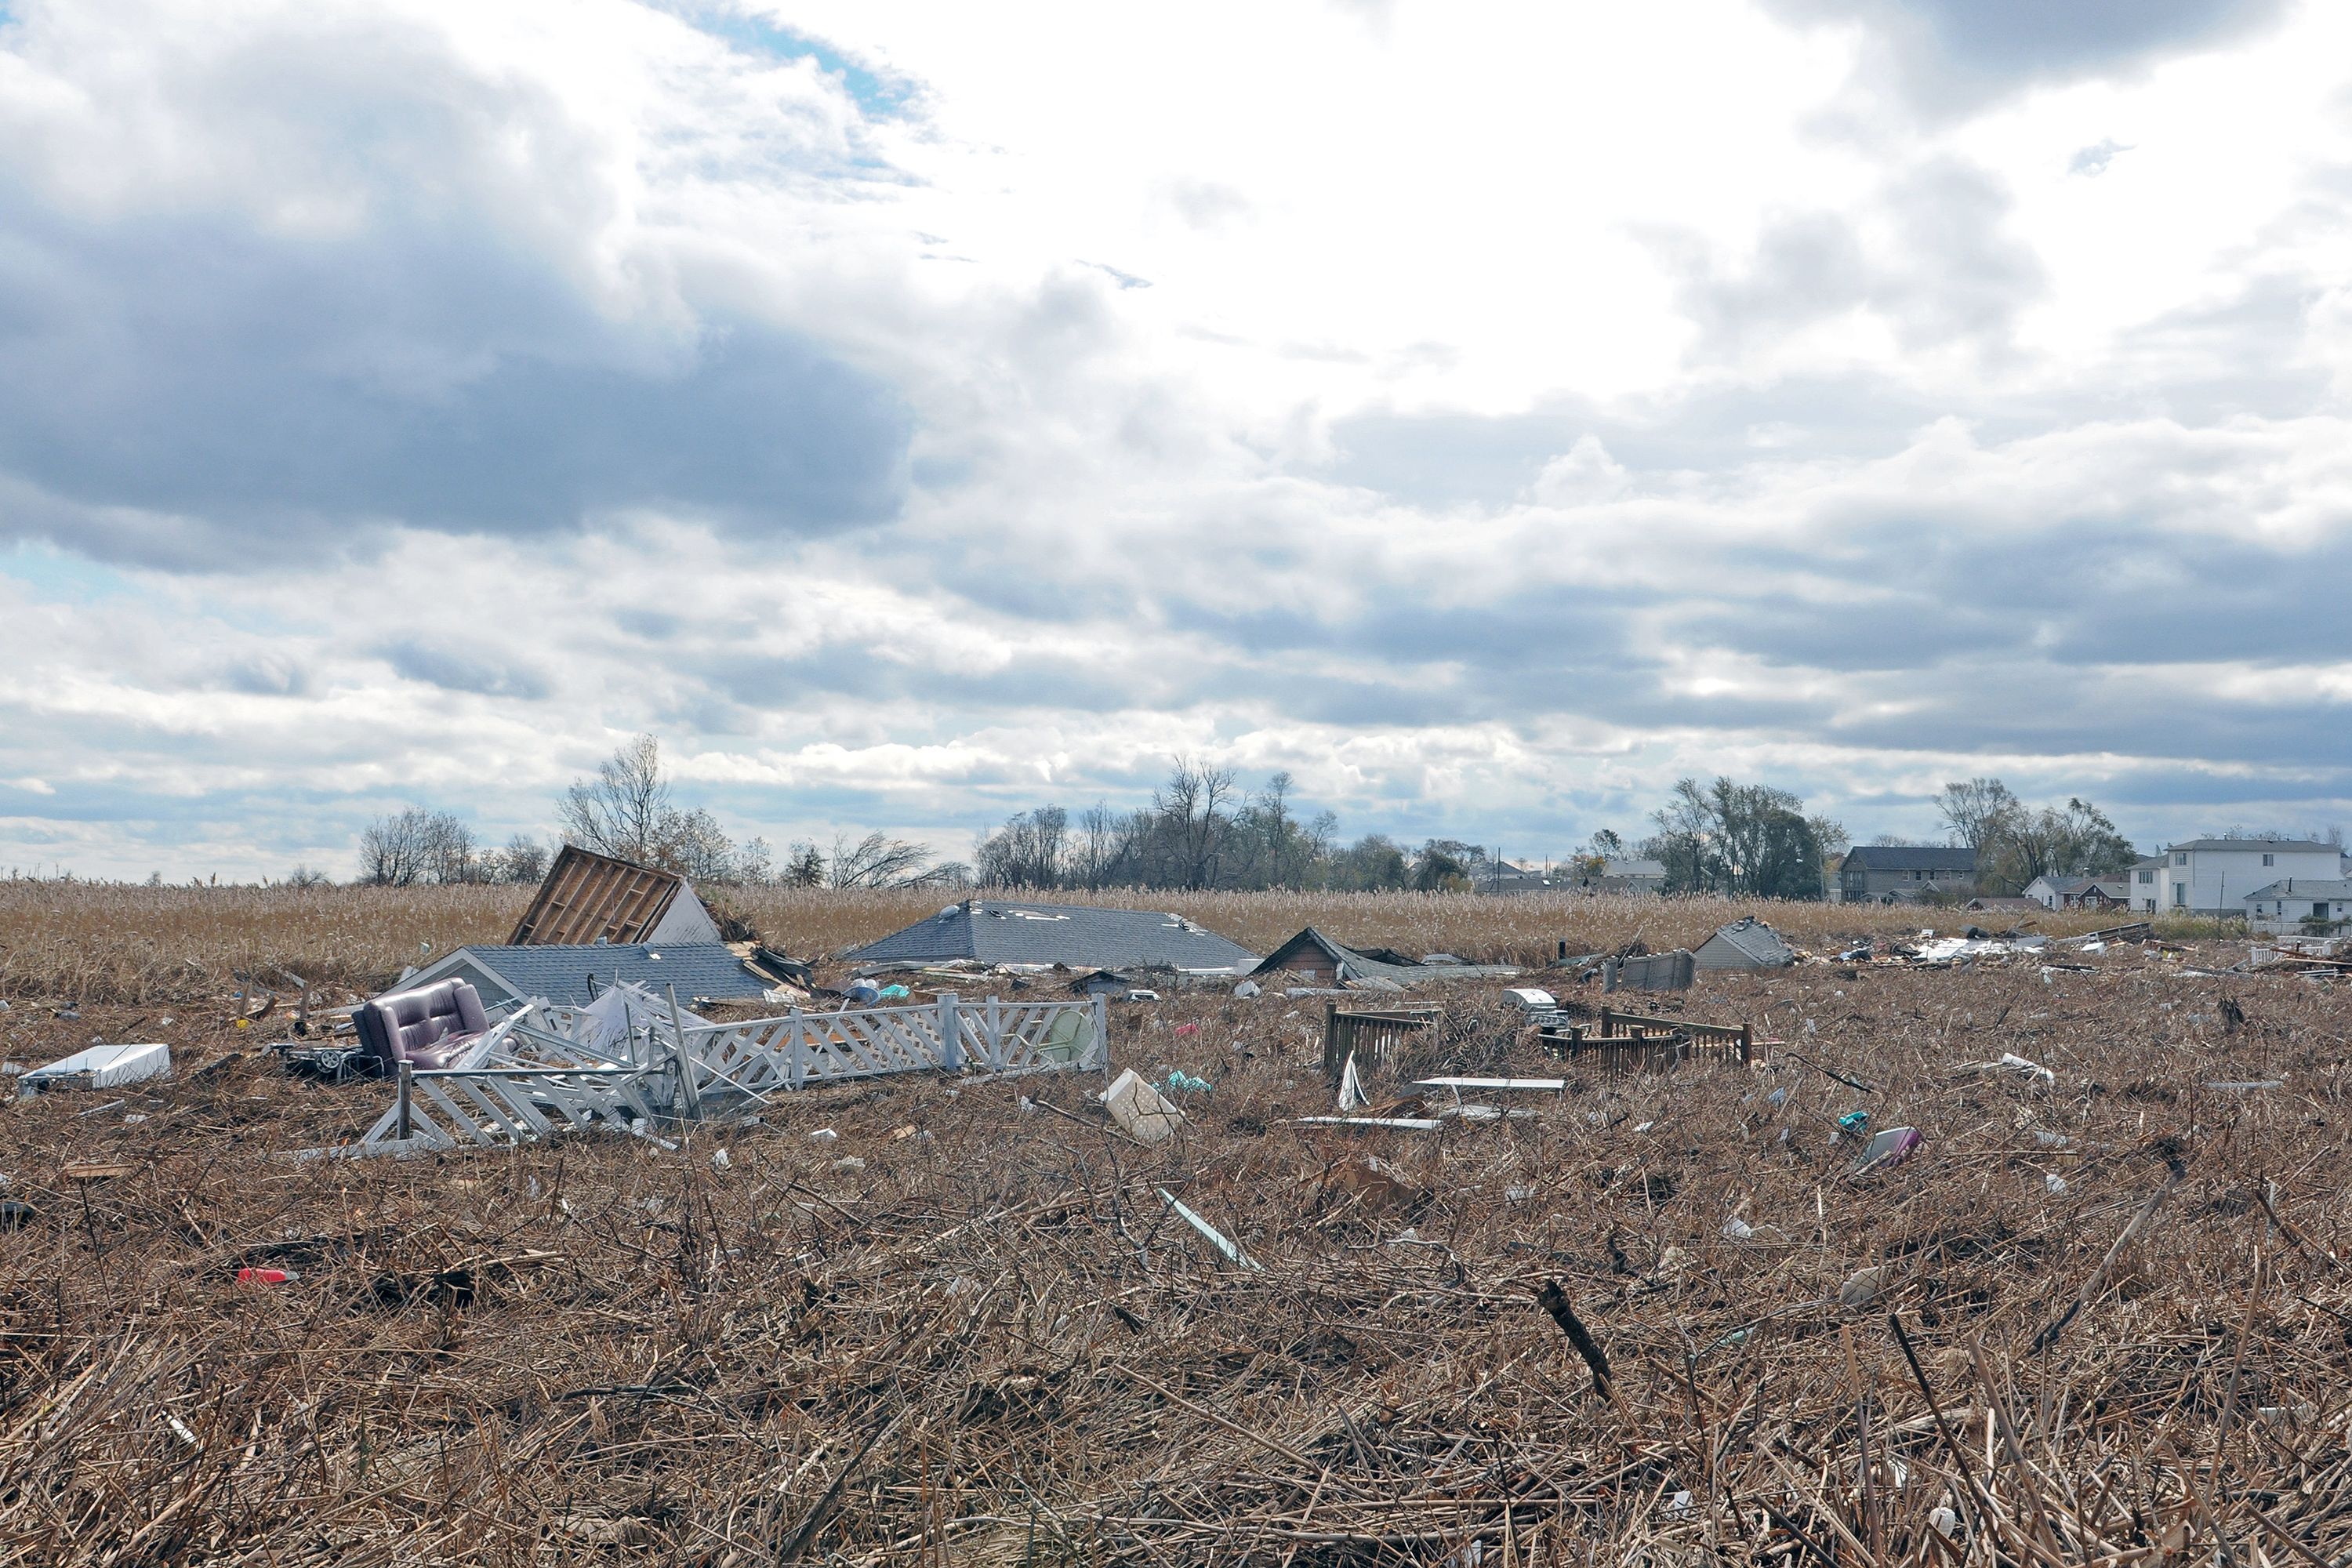 Homes were washed into a marsh near Fox Beach Avenue on Staten Island after Superstorm Sandy, Oct. 31, 2012.